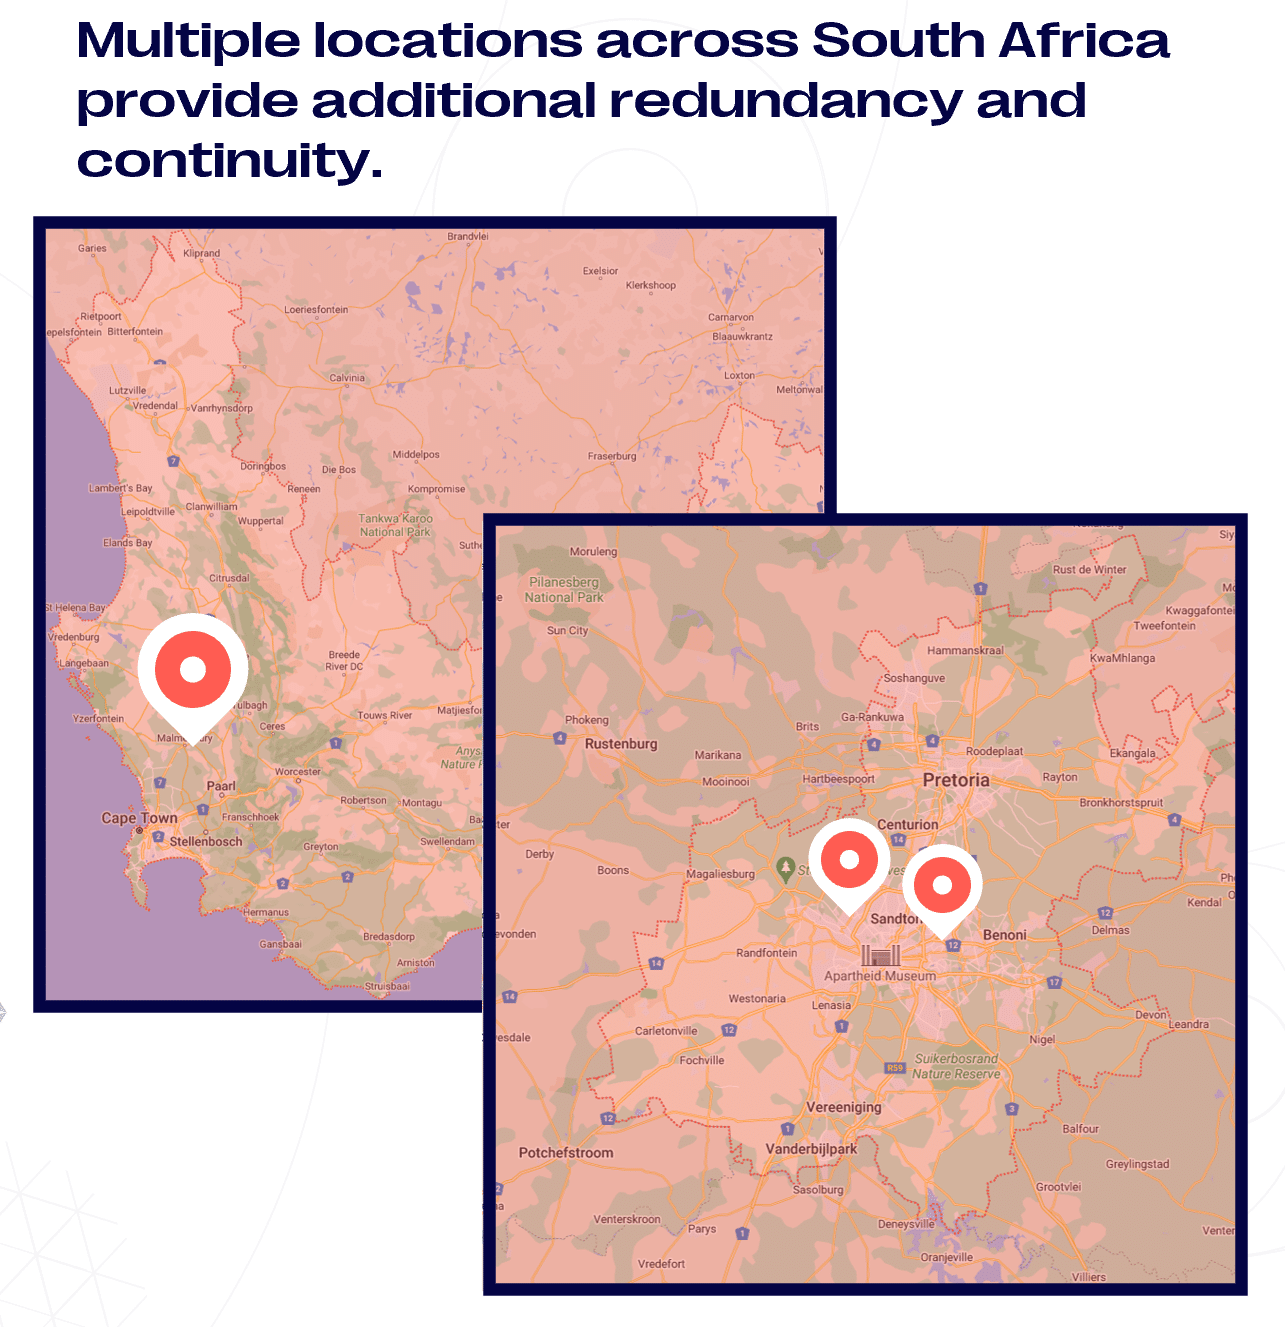 Multiple locations across South Africa provide additional redundancy and continuity.